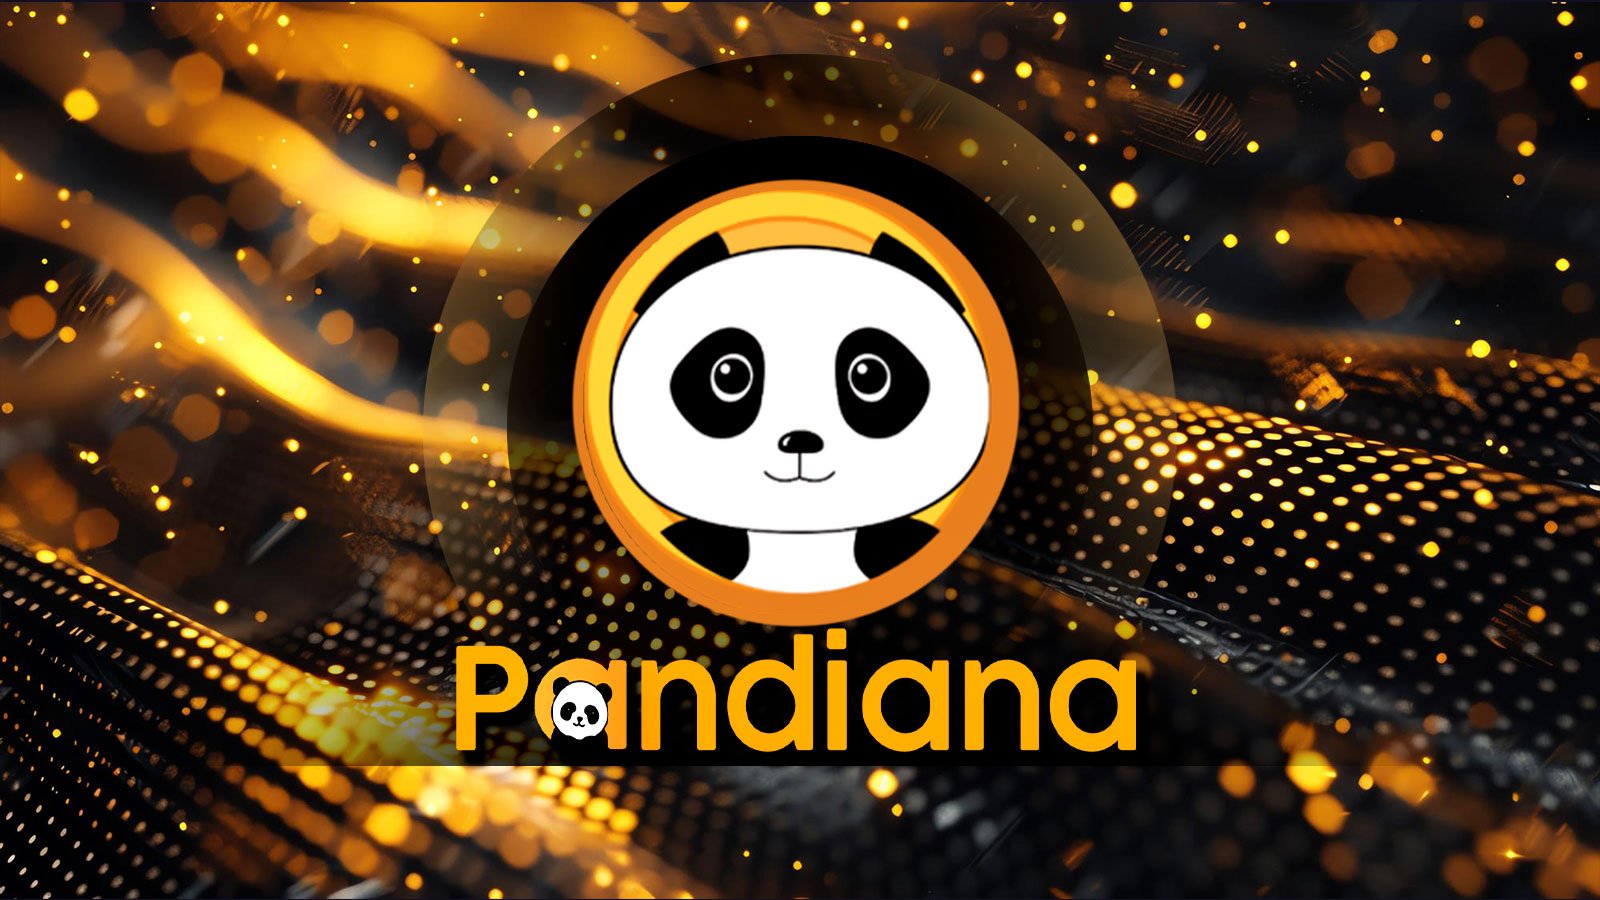 Pandiana: Don’t Miss Solana’s Most Anticipated Meme Coin Presale Launching This Thursday